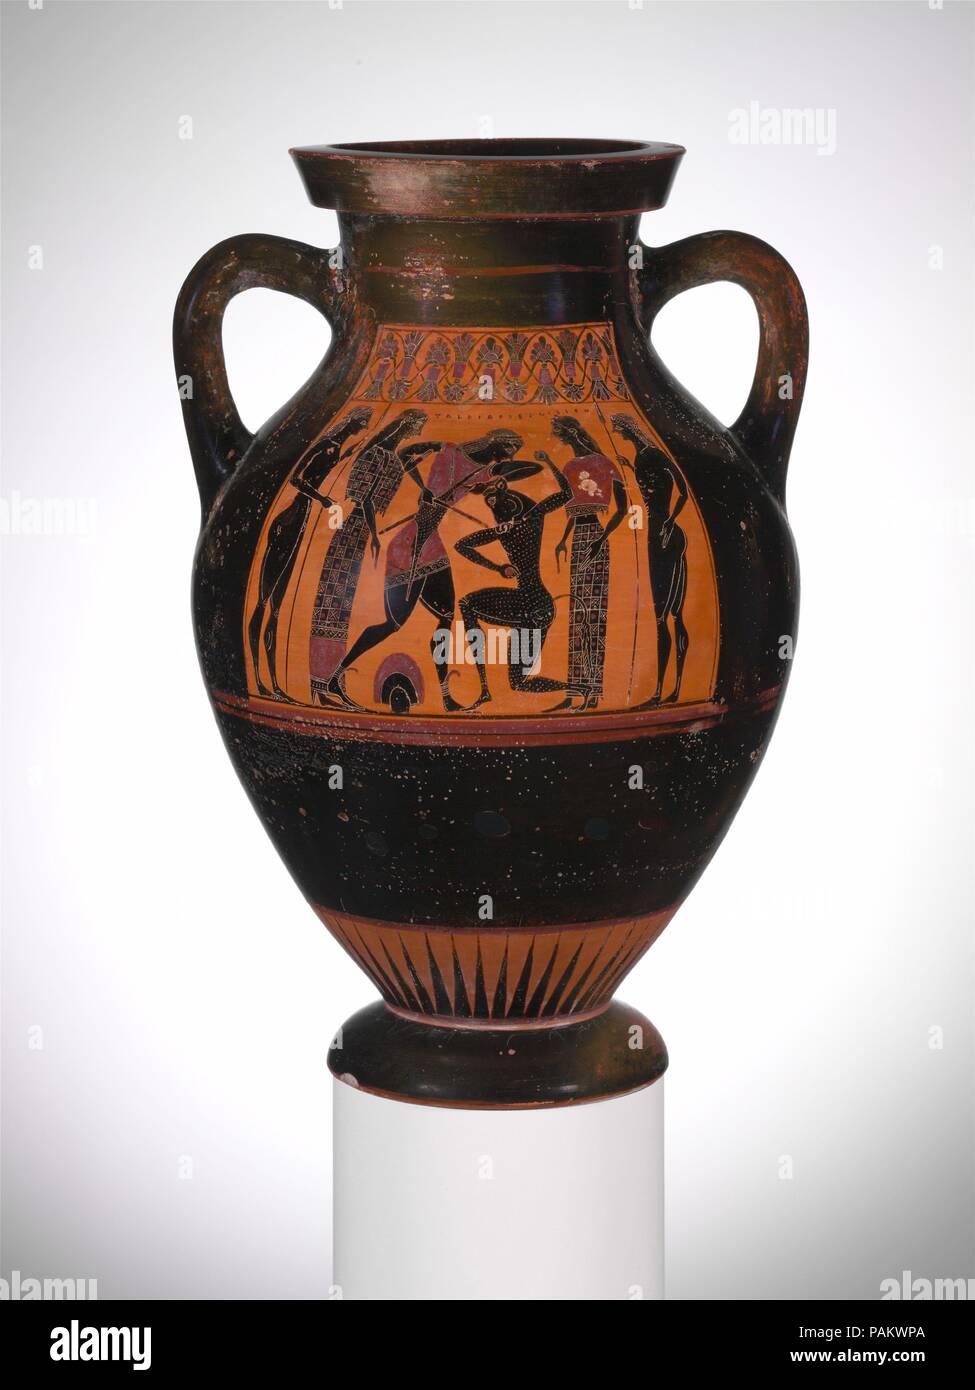 Terracotta amphora (jar). Culture: Greek, Attic. Dimensions: H. 11 5/8 in. (29.5 cm). Date: ca. 540-530 B.C..  Obverse, Theseus slaying the Minotaur  Reverse, men weighing merchandise  Discovered at Agrigento in Sicily before 1801, this may be the first Greek vase with a potter's signature to have been published in modern Europe. Besides the signature, there is an inscription praising a youth, Klitarchos, as handsome. After Herakles, Theseus is the major hero in Athenian iconography. He was credited with uniting the principalities of Attica and with numerous exploits. Here he kills the Minotau Stock Photo